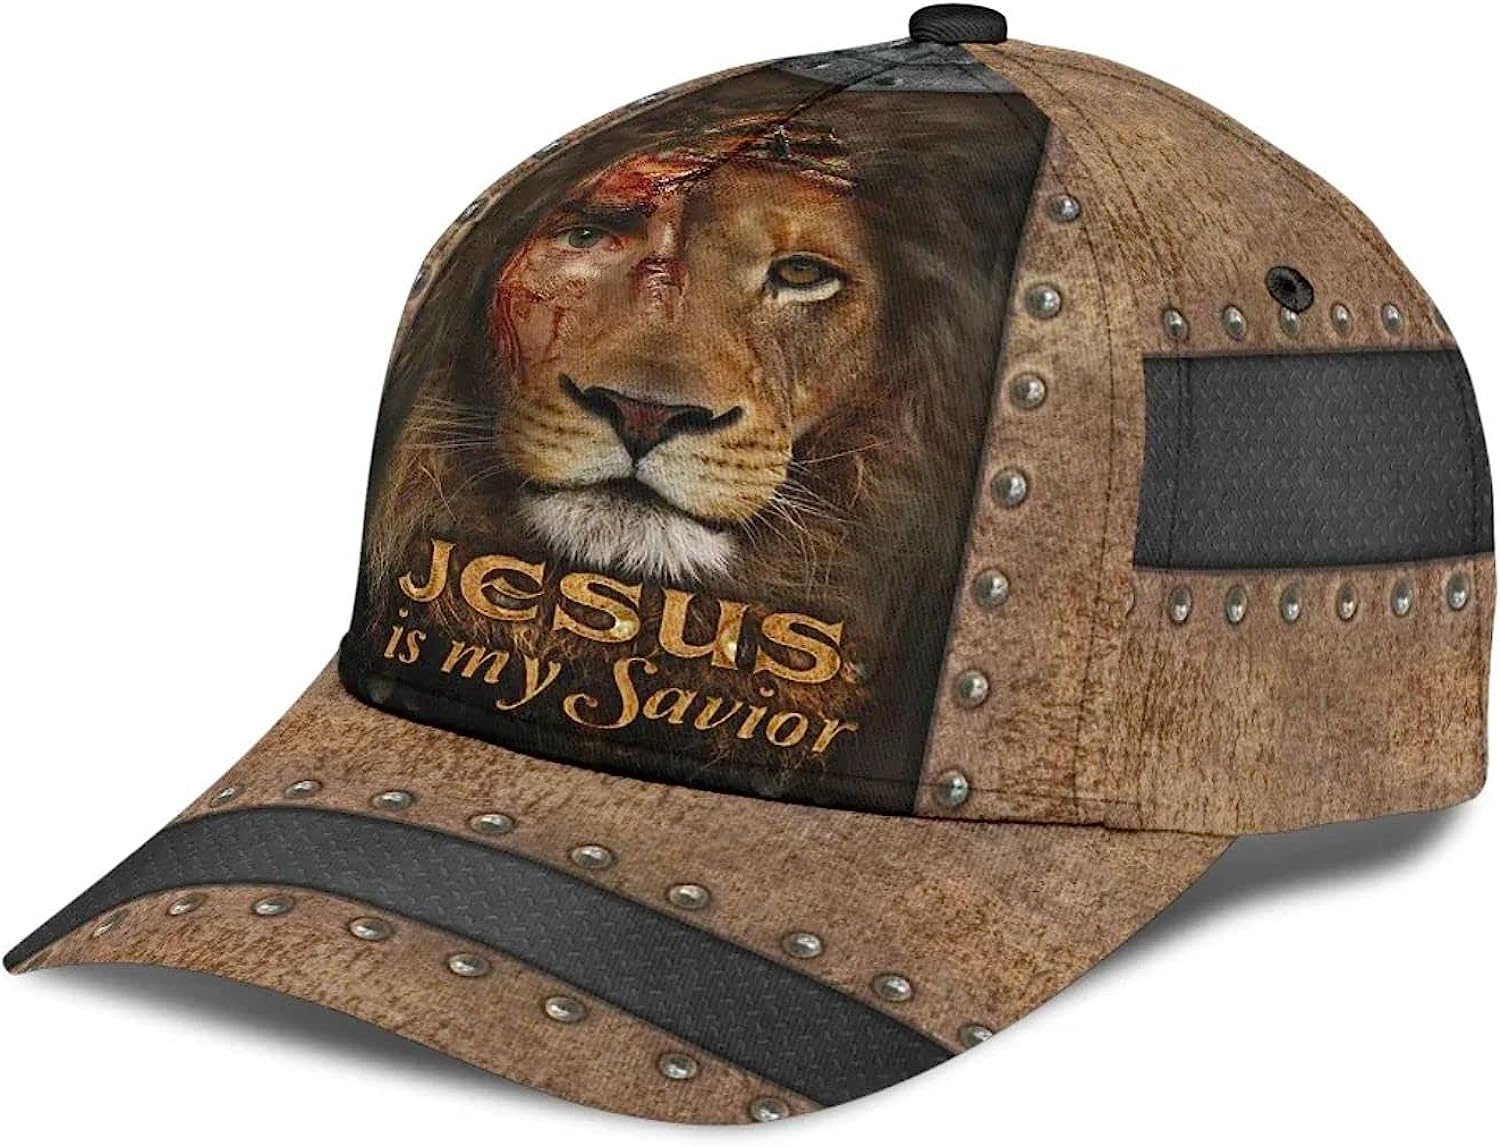 The Lion Jesus Is My Savior Classic Hat All Over Print - Christian Hats for Men and Women